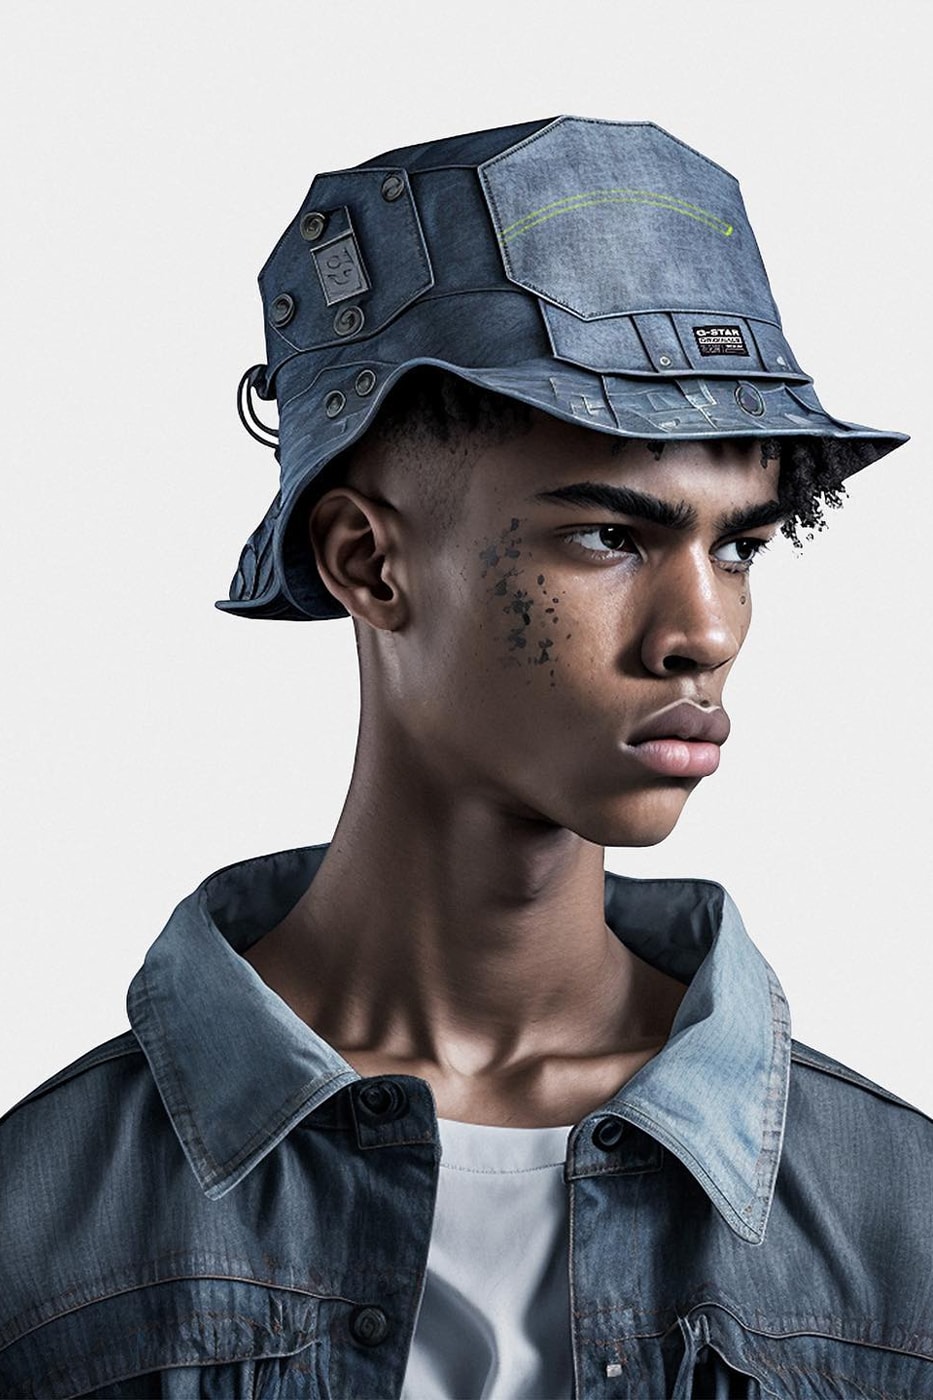 G-Star RAW Releases AI-Designed Denim Collection